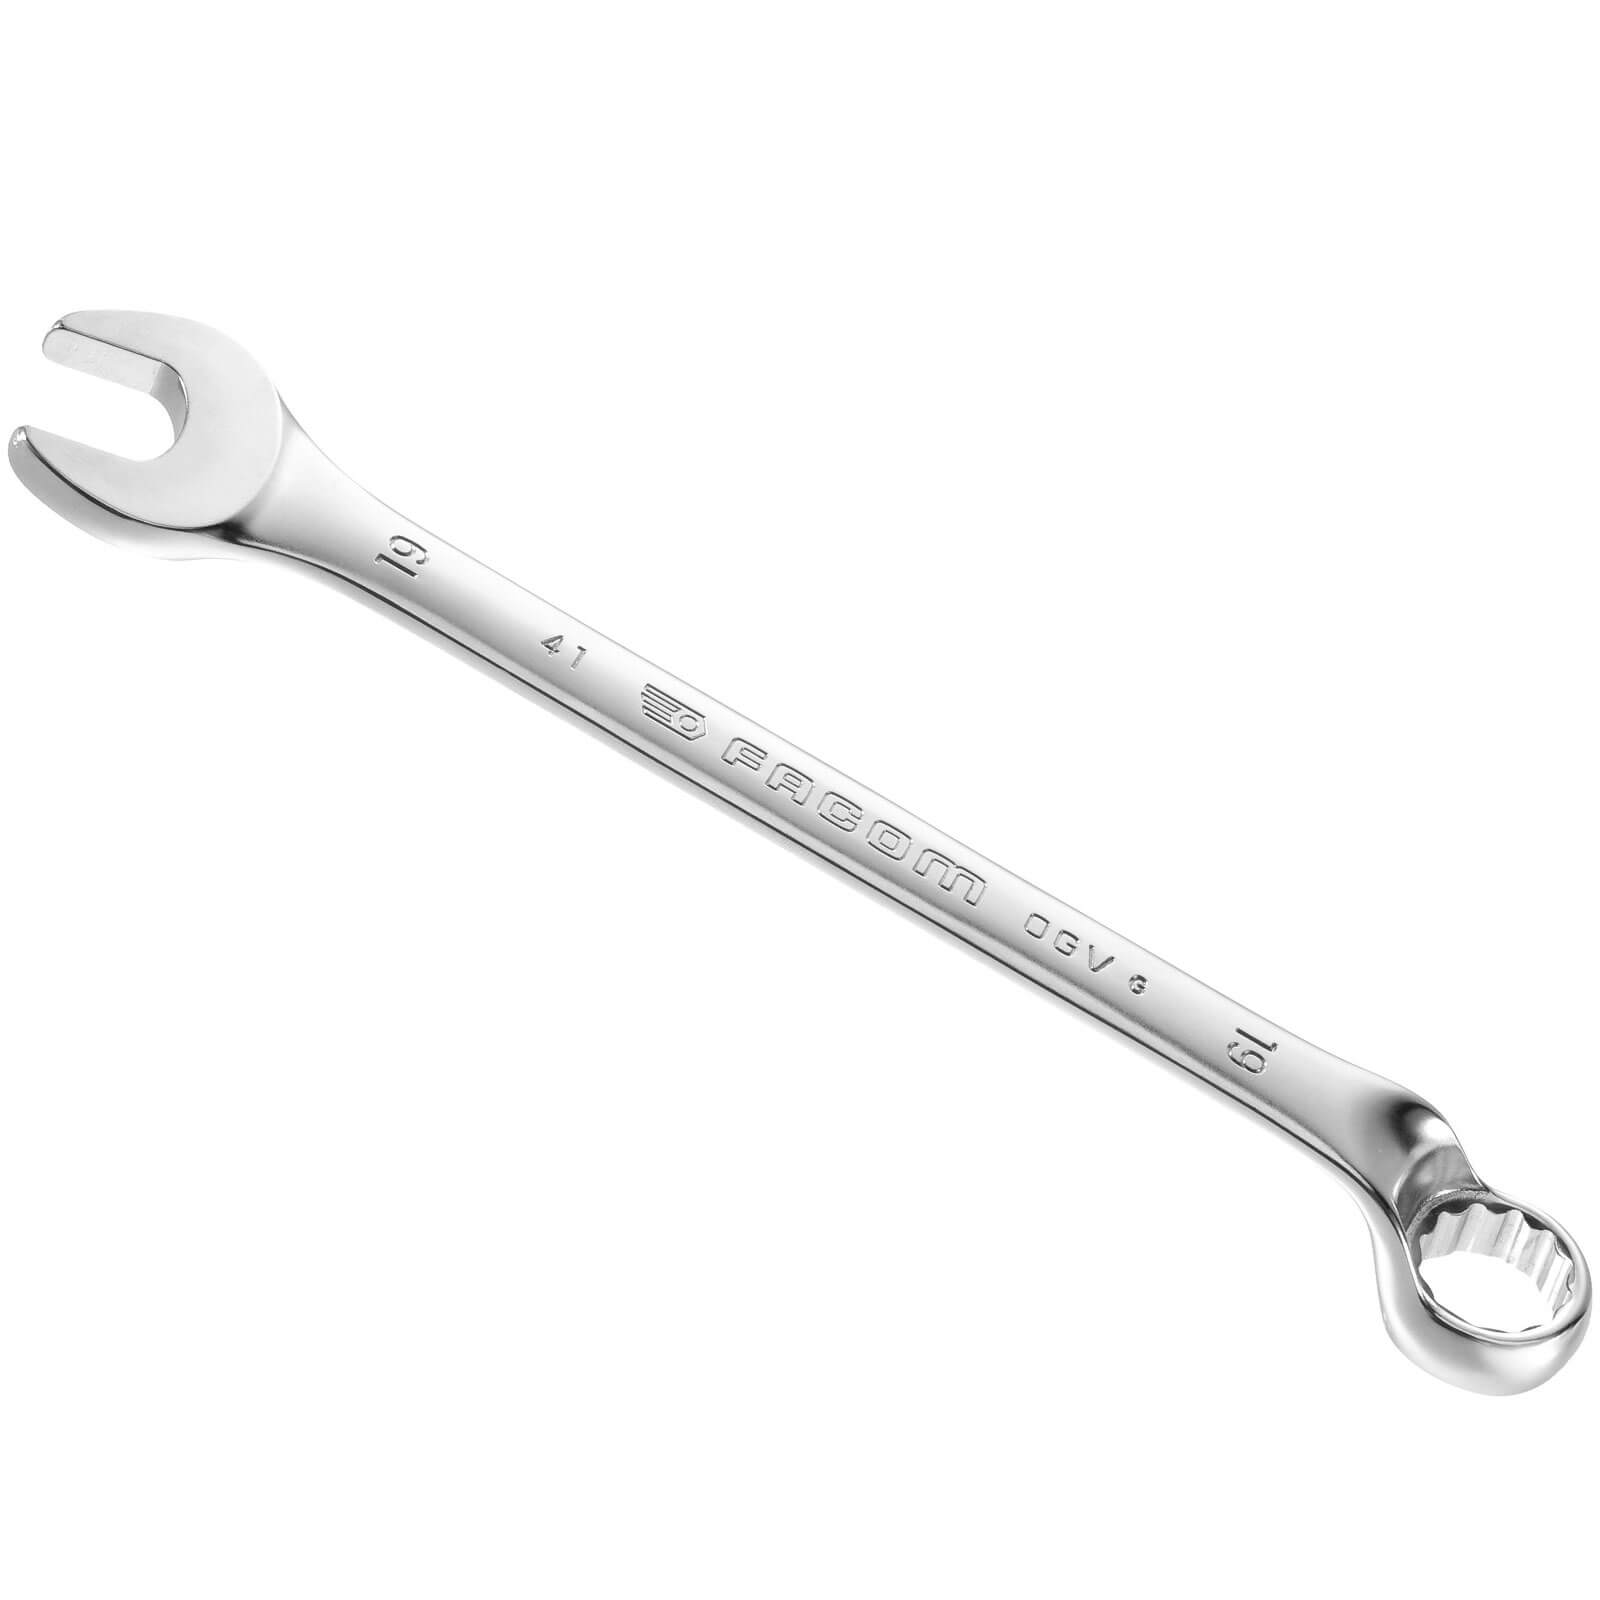 Photo of Facom 41 Series Offset Combination Spanner Metric 27mm